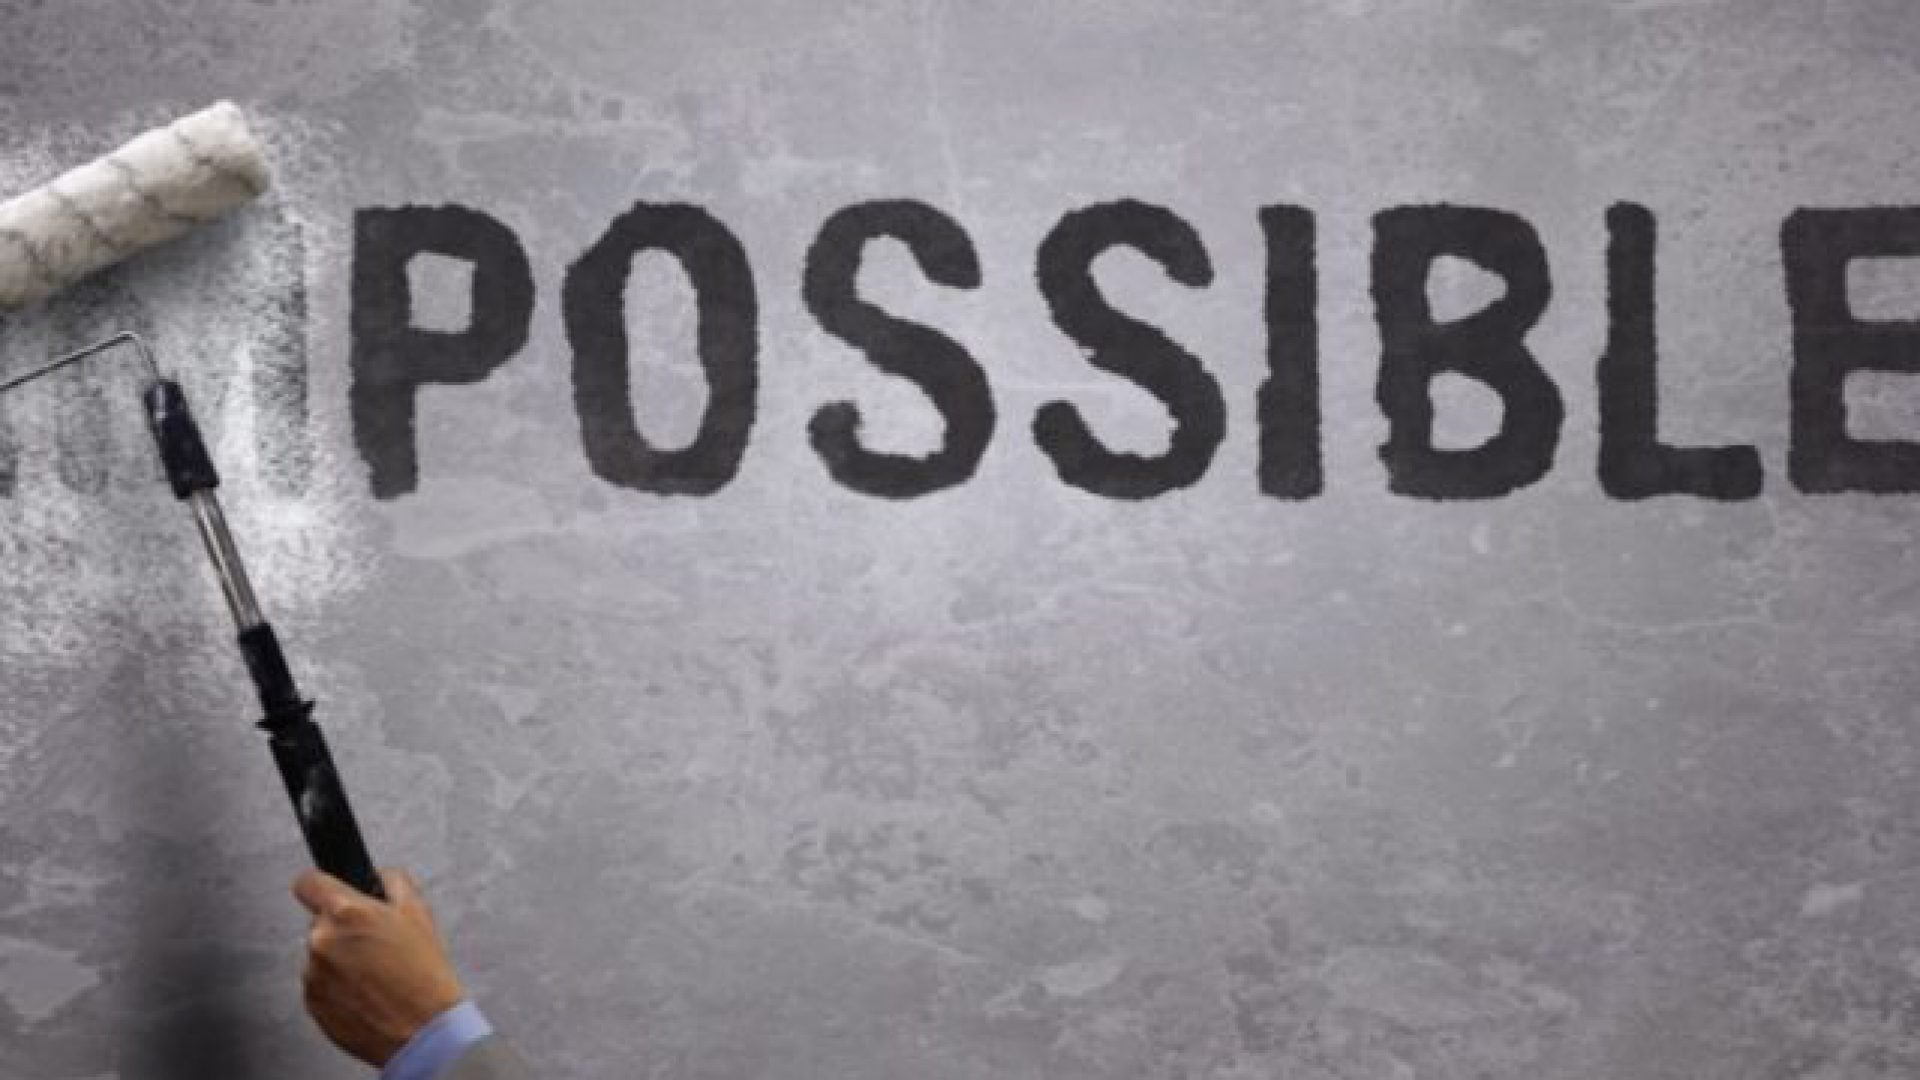 MAKING POSSIBLE YOUR IMPOSSIBILITIES